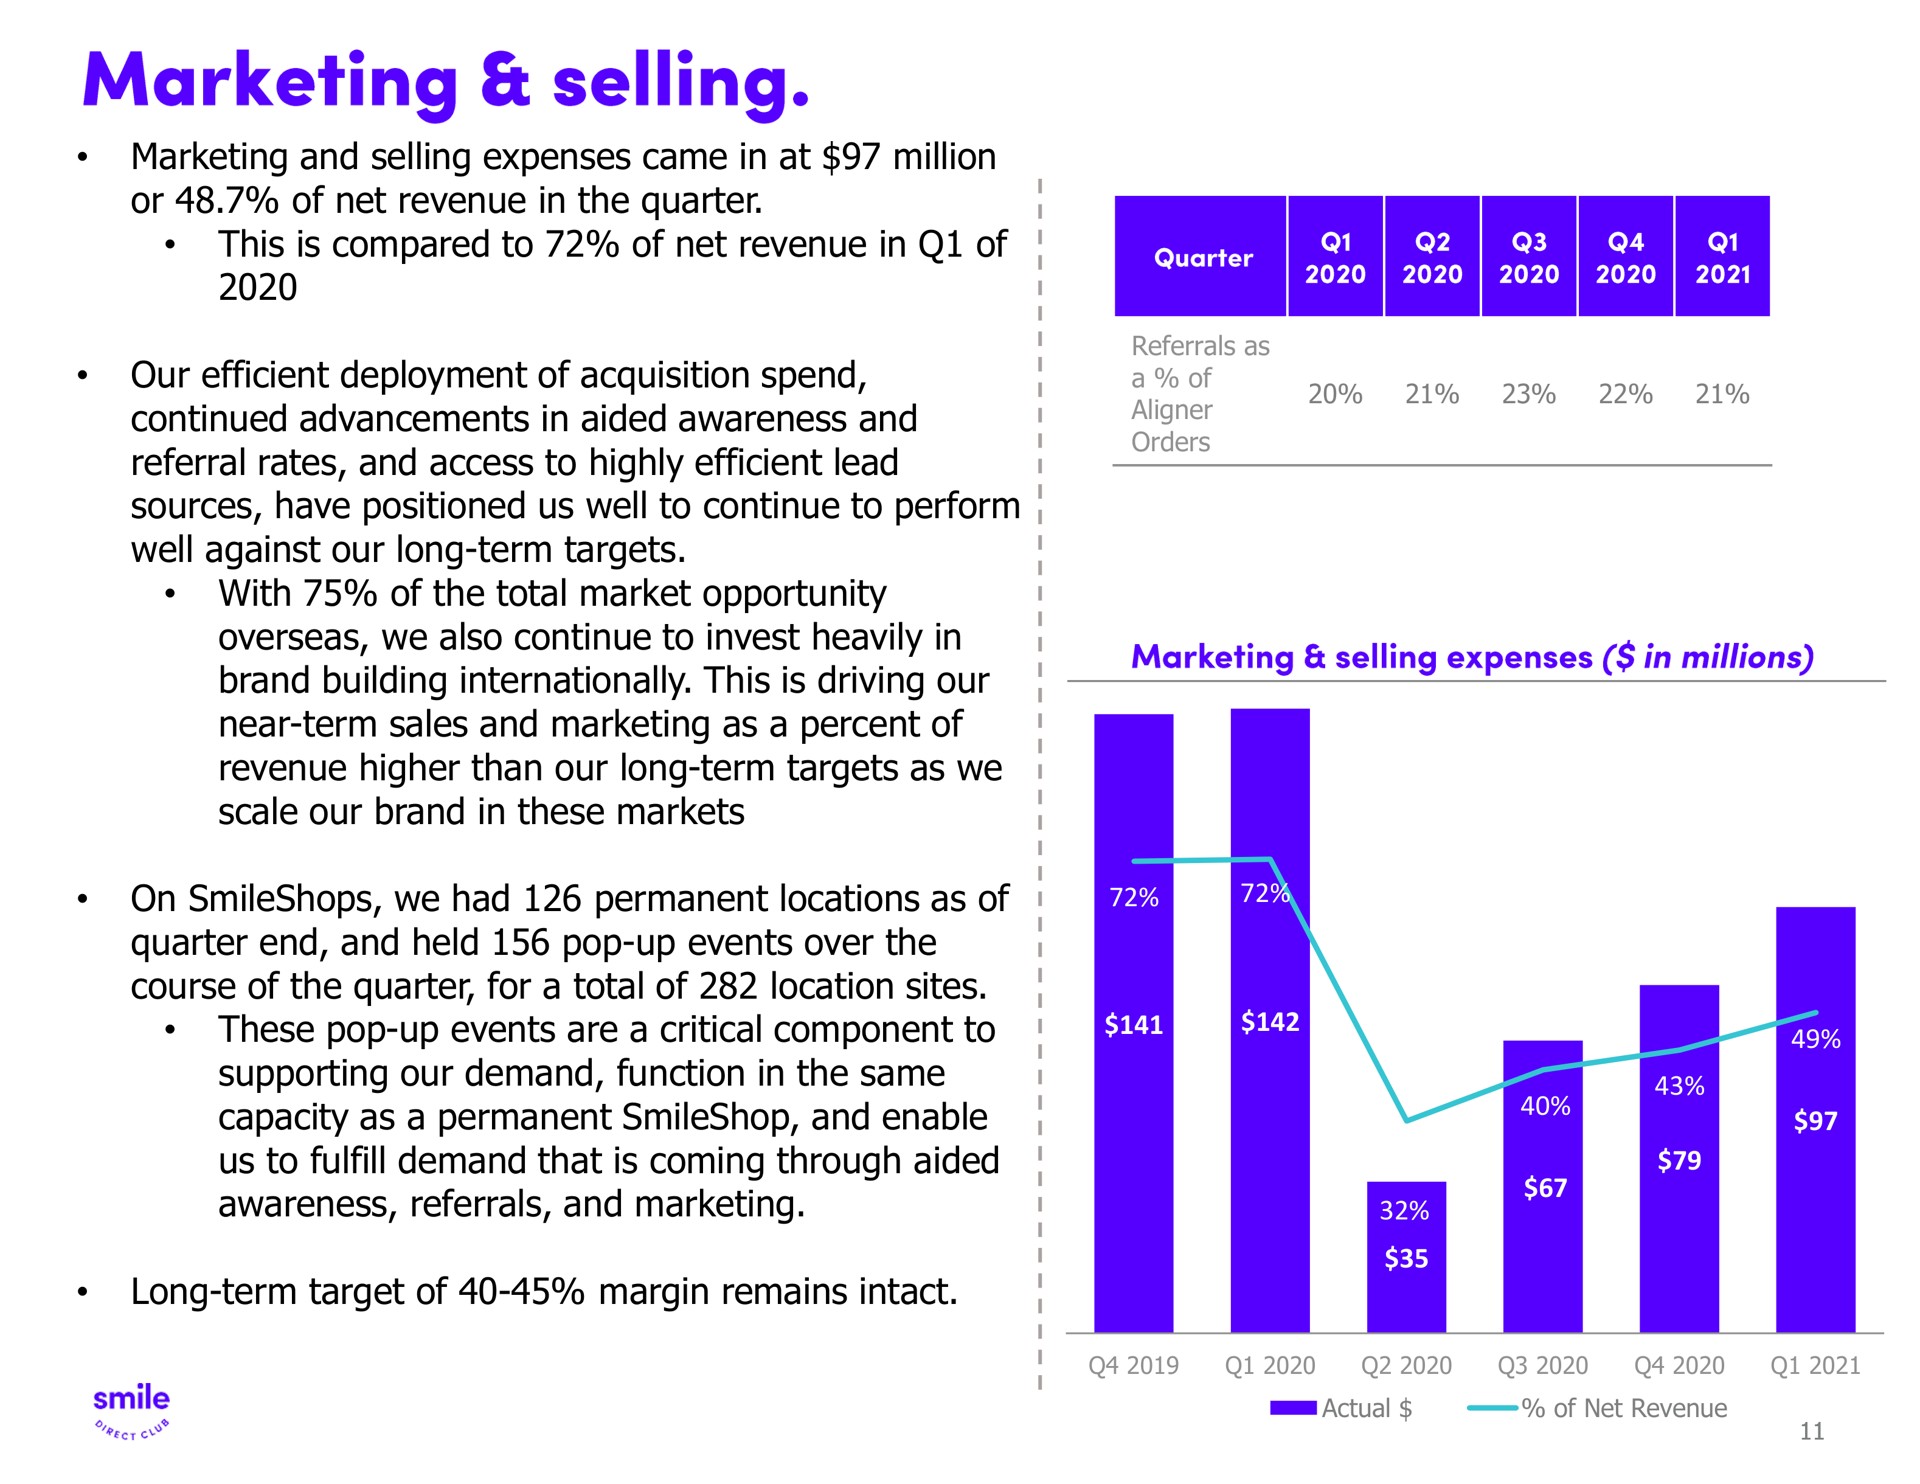 marketing and selling expenses came in at million or of net revenue in the quarter this is compared to of net revenue in of our efficient deployment of acquisition spend continued advancements in aided awareness and referral rates and access to highly efficient lead sources have positioned us well to continue to perform well against our long term targets with of the total market opportunity overseas we also continue to invest heavily in brand building internationally this is driving our near term sales and marketing as a percent of revenue higher than our long term targets as we scale our brand in these markets on we had permanent locations as of quarter end and held pop up events over the course of the quarter for a total of location sites these pop up events are a critical component to supporting our demand function in the same capacity as a permanent and enable us to fulfill demand that is coming through aided awareness referrals and marketing long term target of margin remains intact | SmileDirectClub